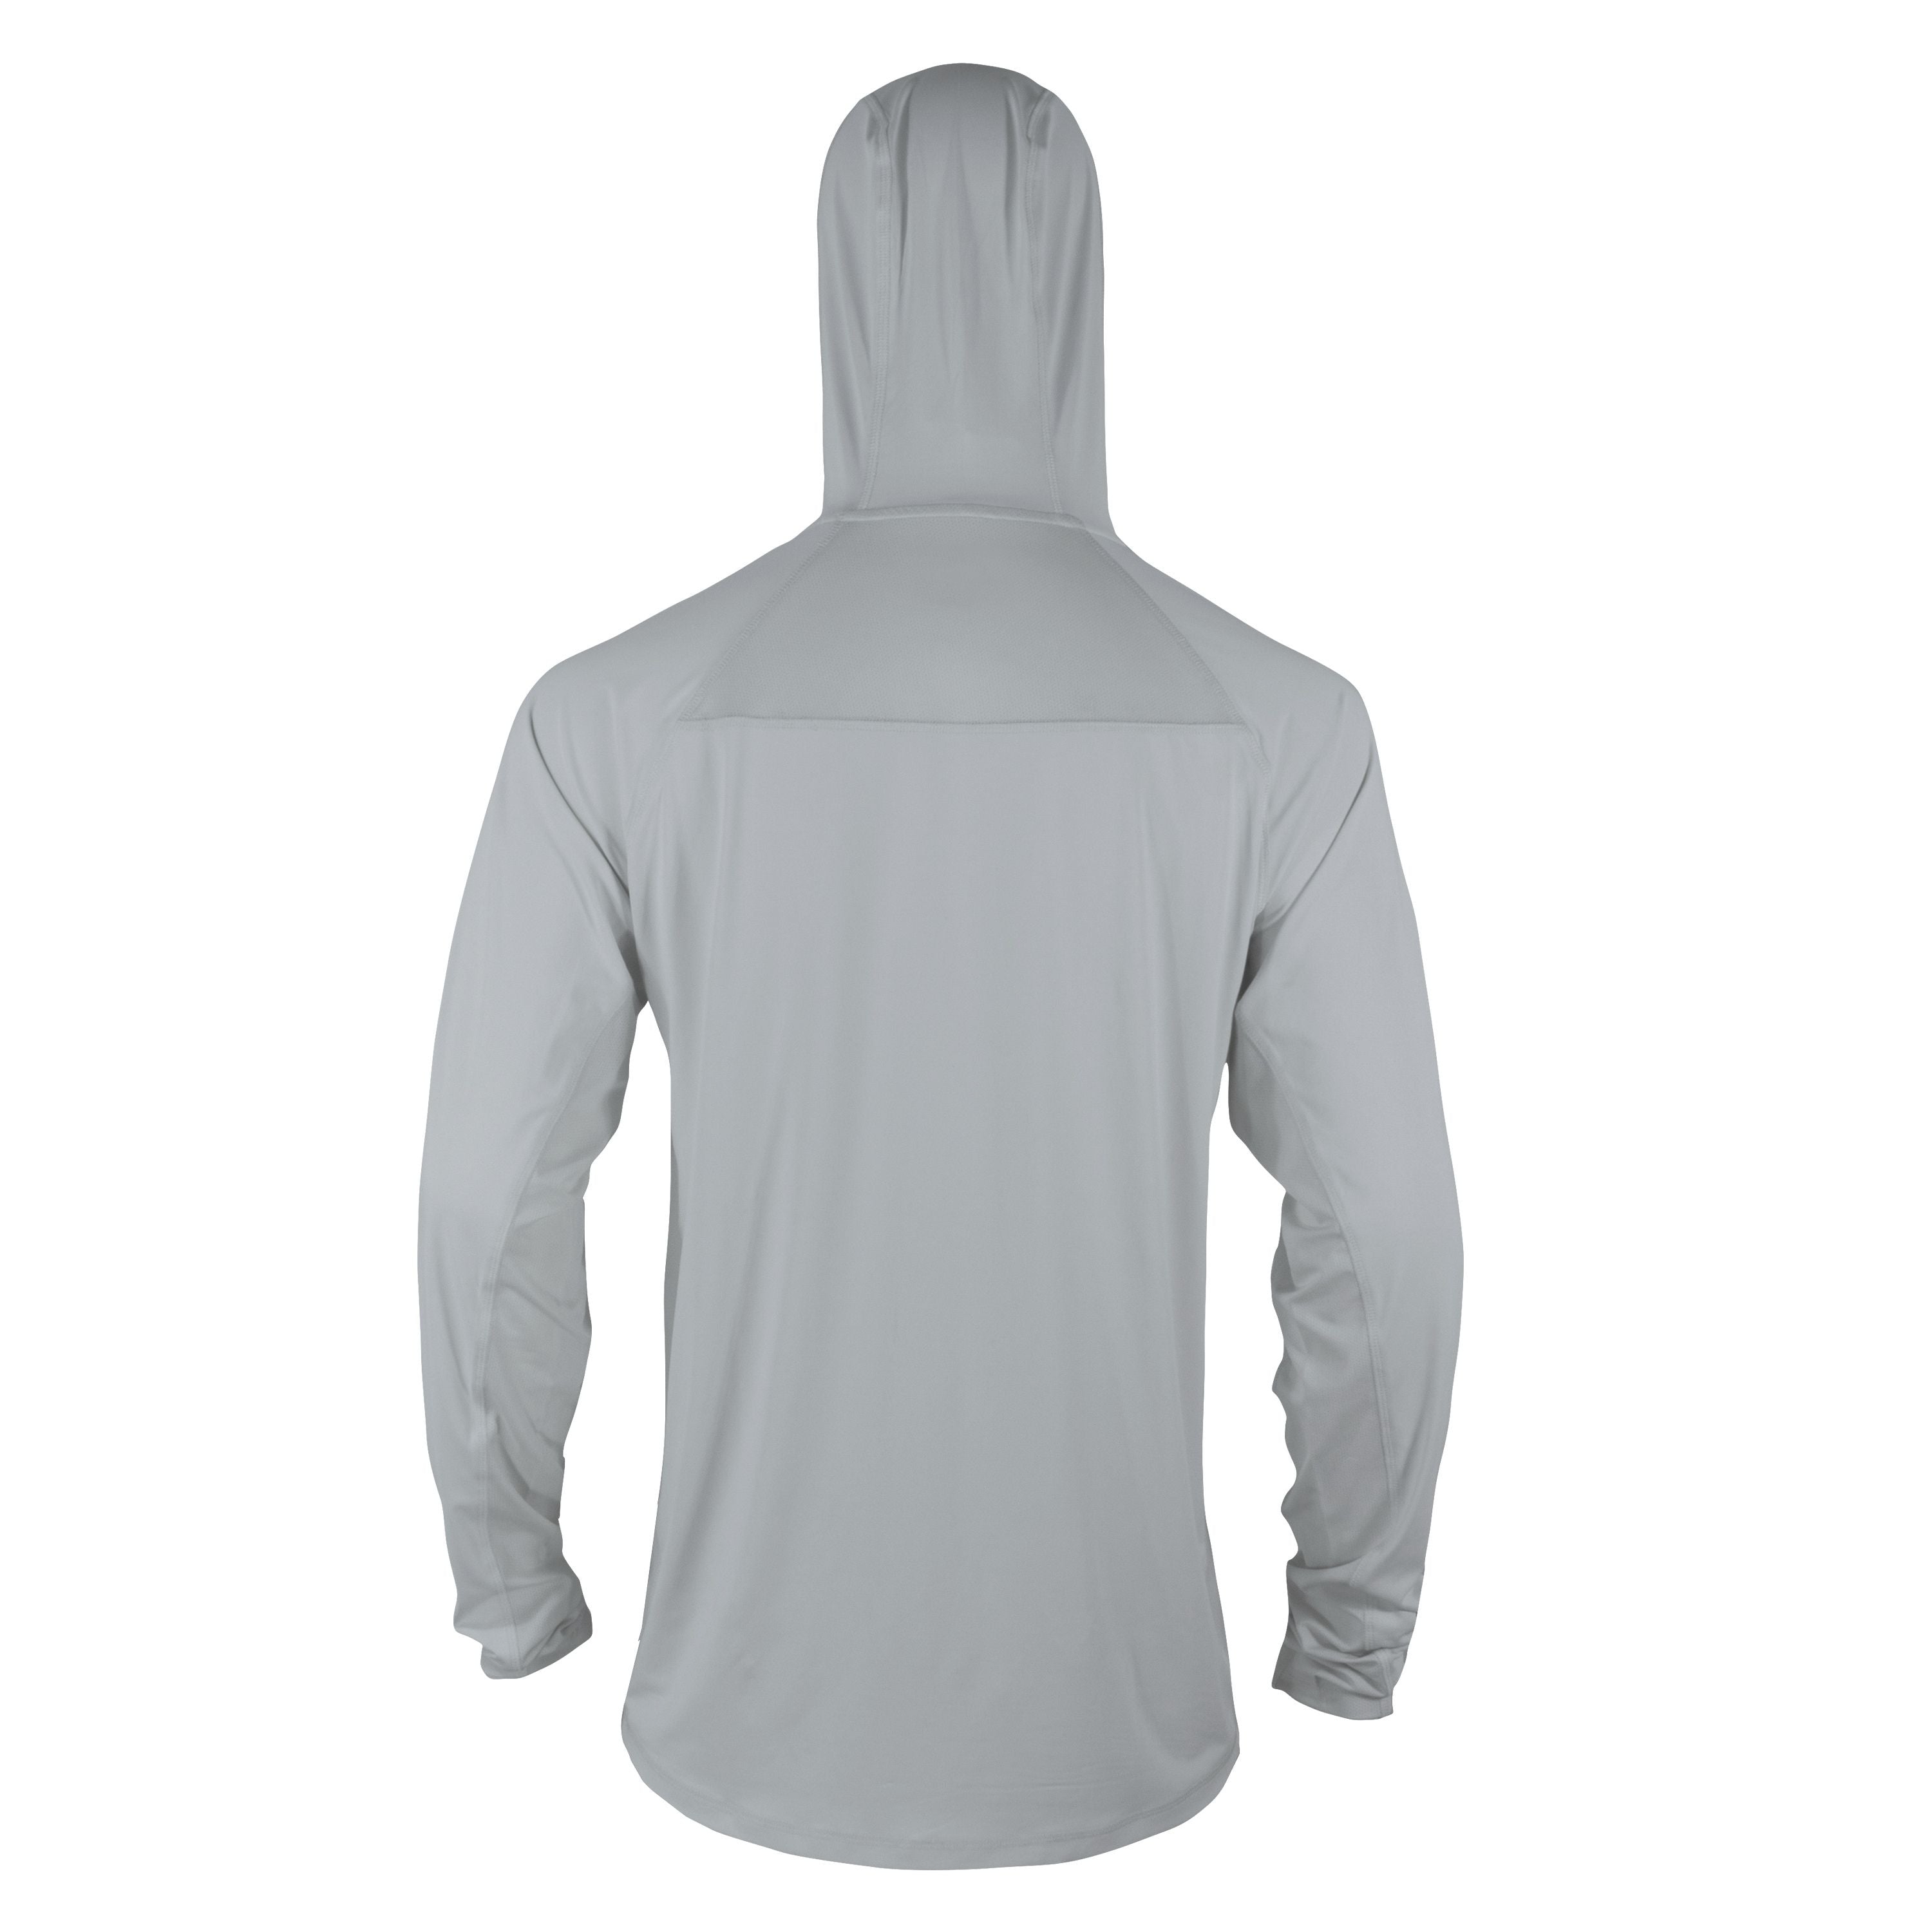 Long sleeves t-shirt with hood - Men's